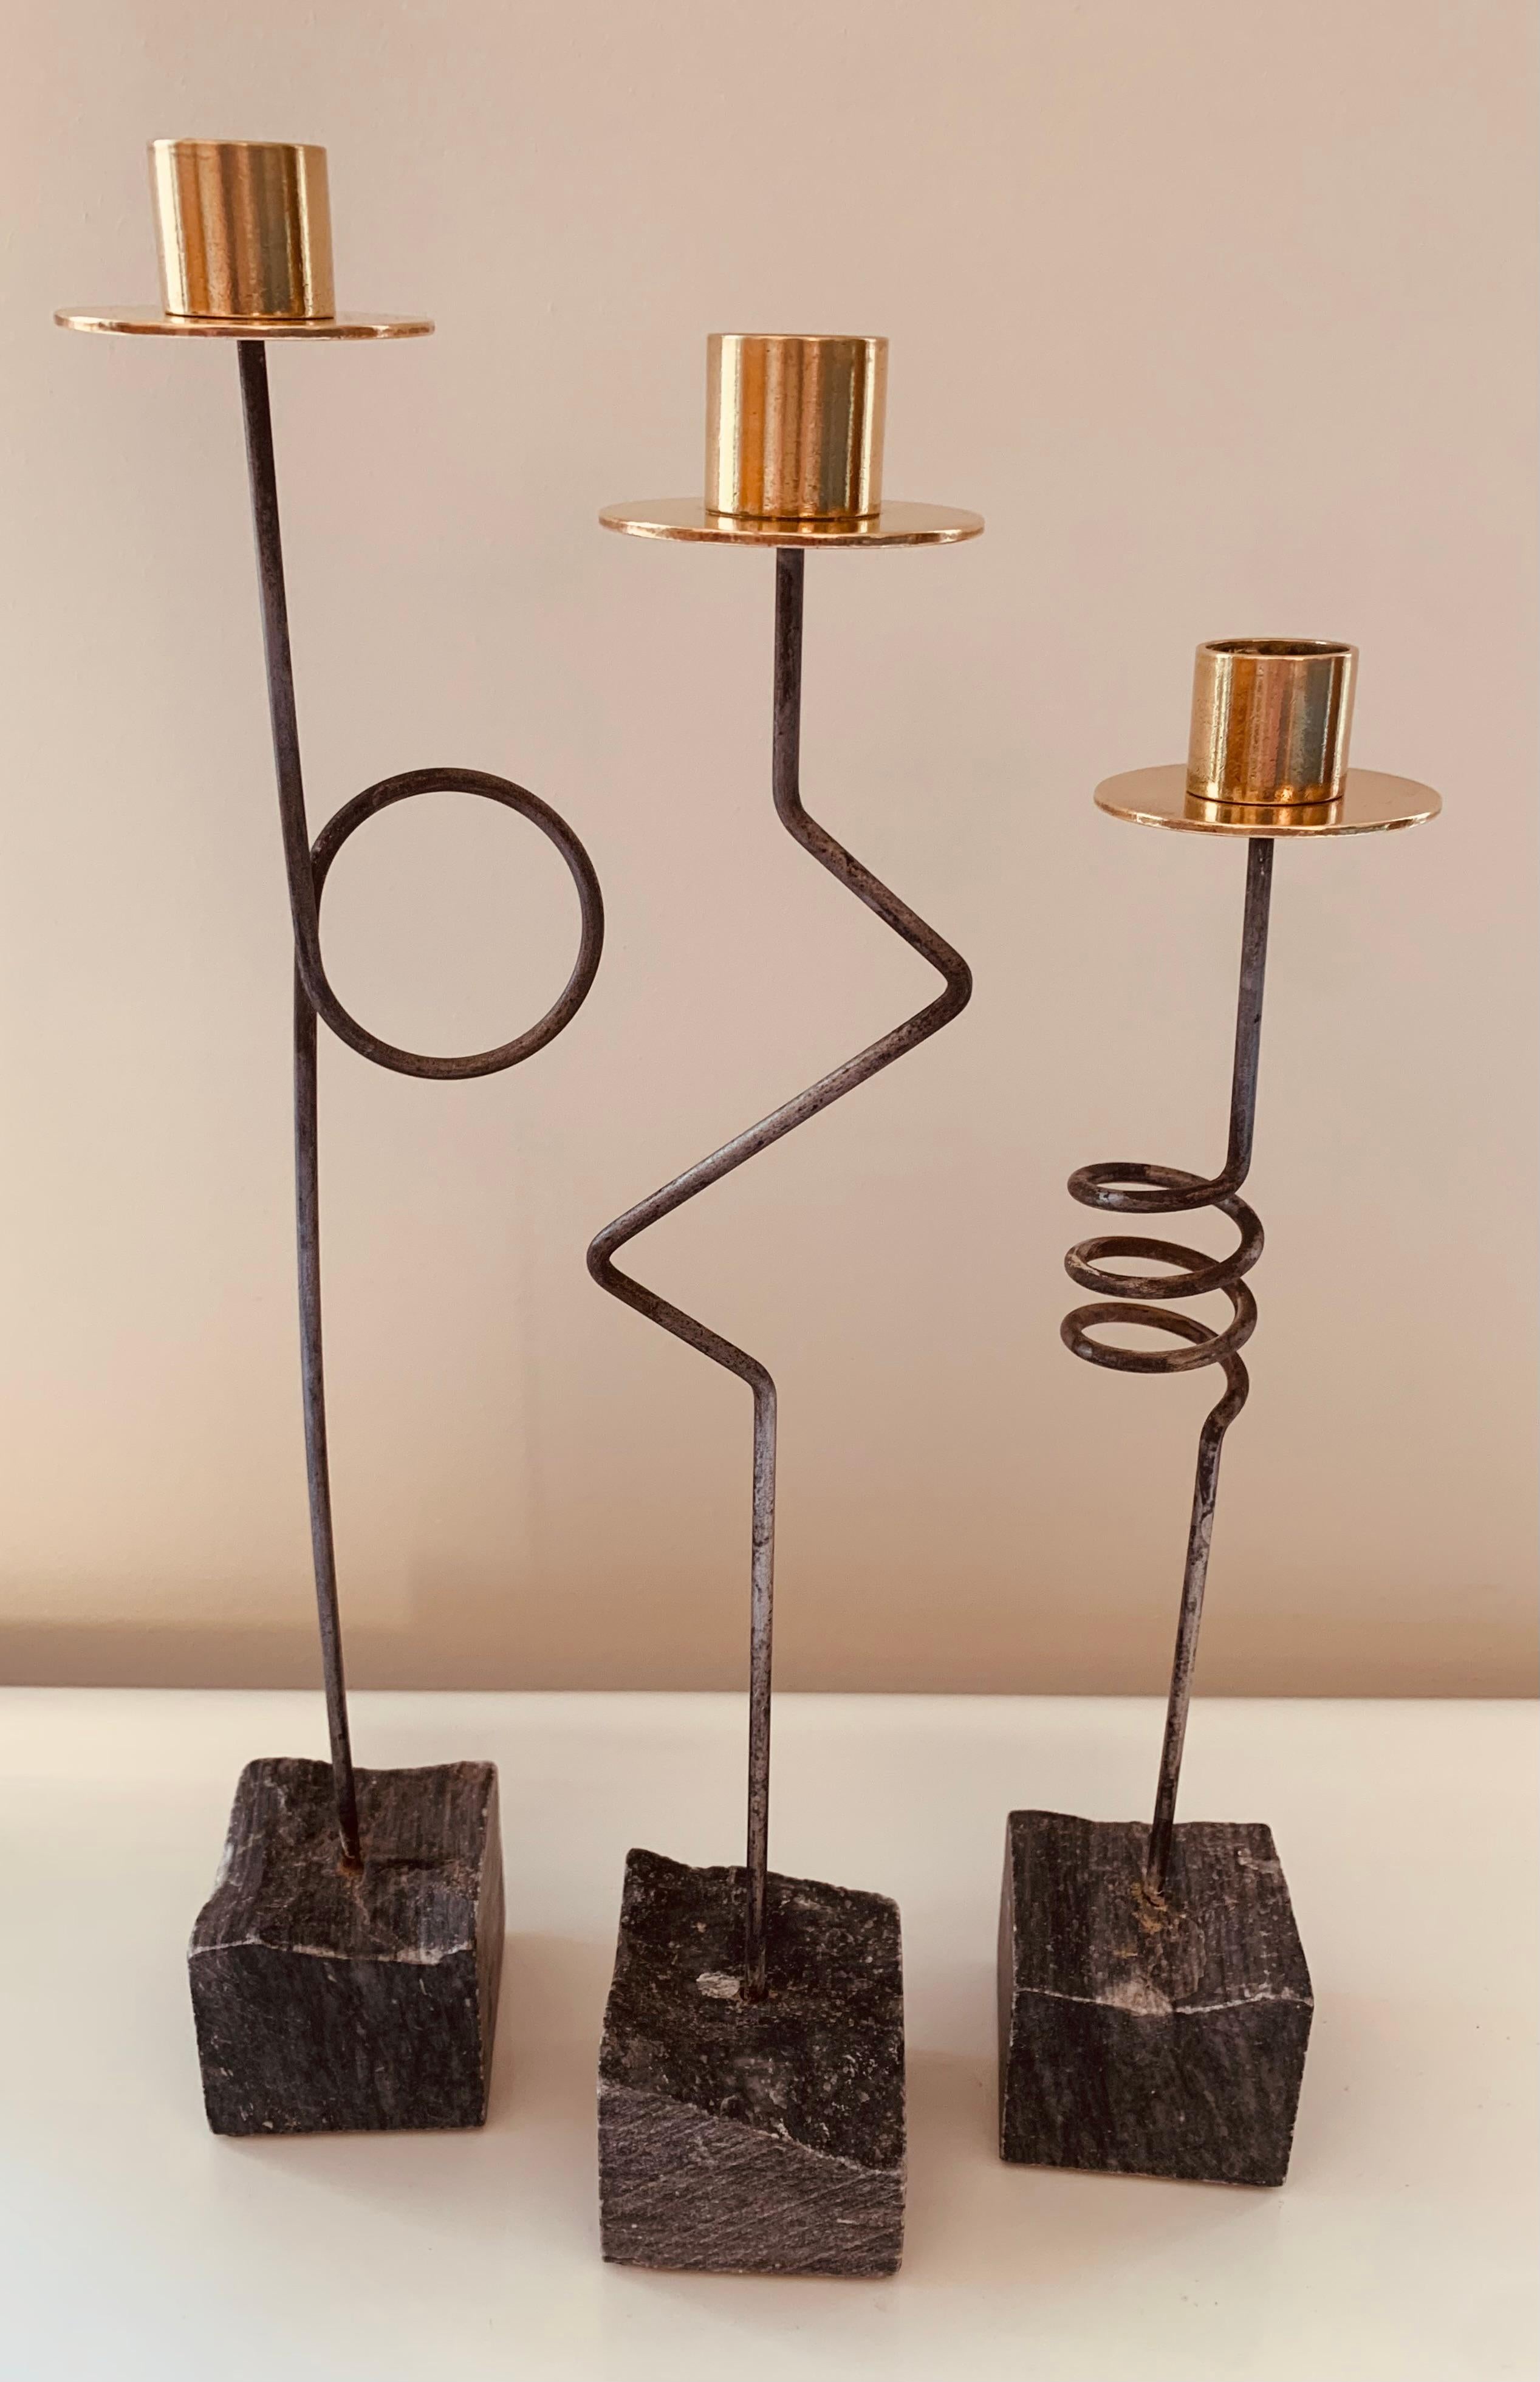 An unusual set of 3 vintage Ikea 1980s Kräsen candle holders designed by Ehlén Johansson. The three candle holders form an abstract Picassoesque face with an eye, nose and corkscrew mouth. Each one is constructed with a brass candle holder and wax